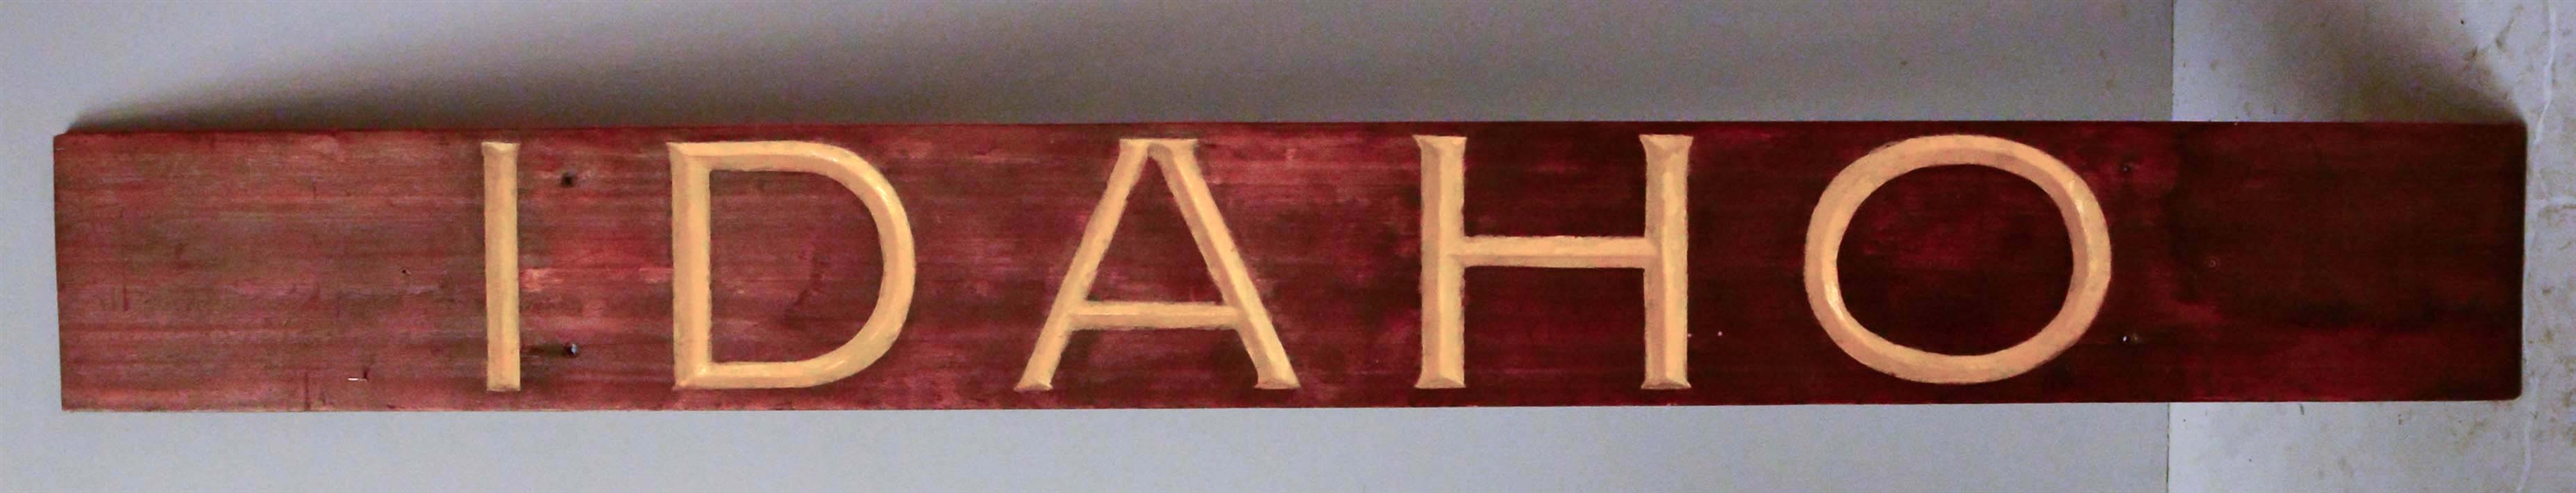 IDAHO FOREST SERVICE WOODEN SIGN WITH CARVED LETTERING. 